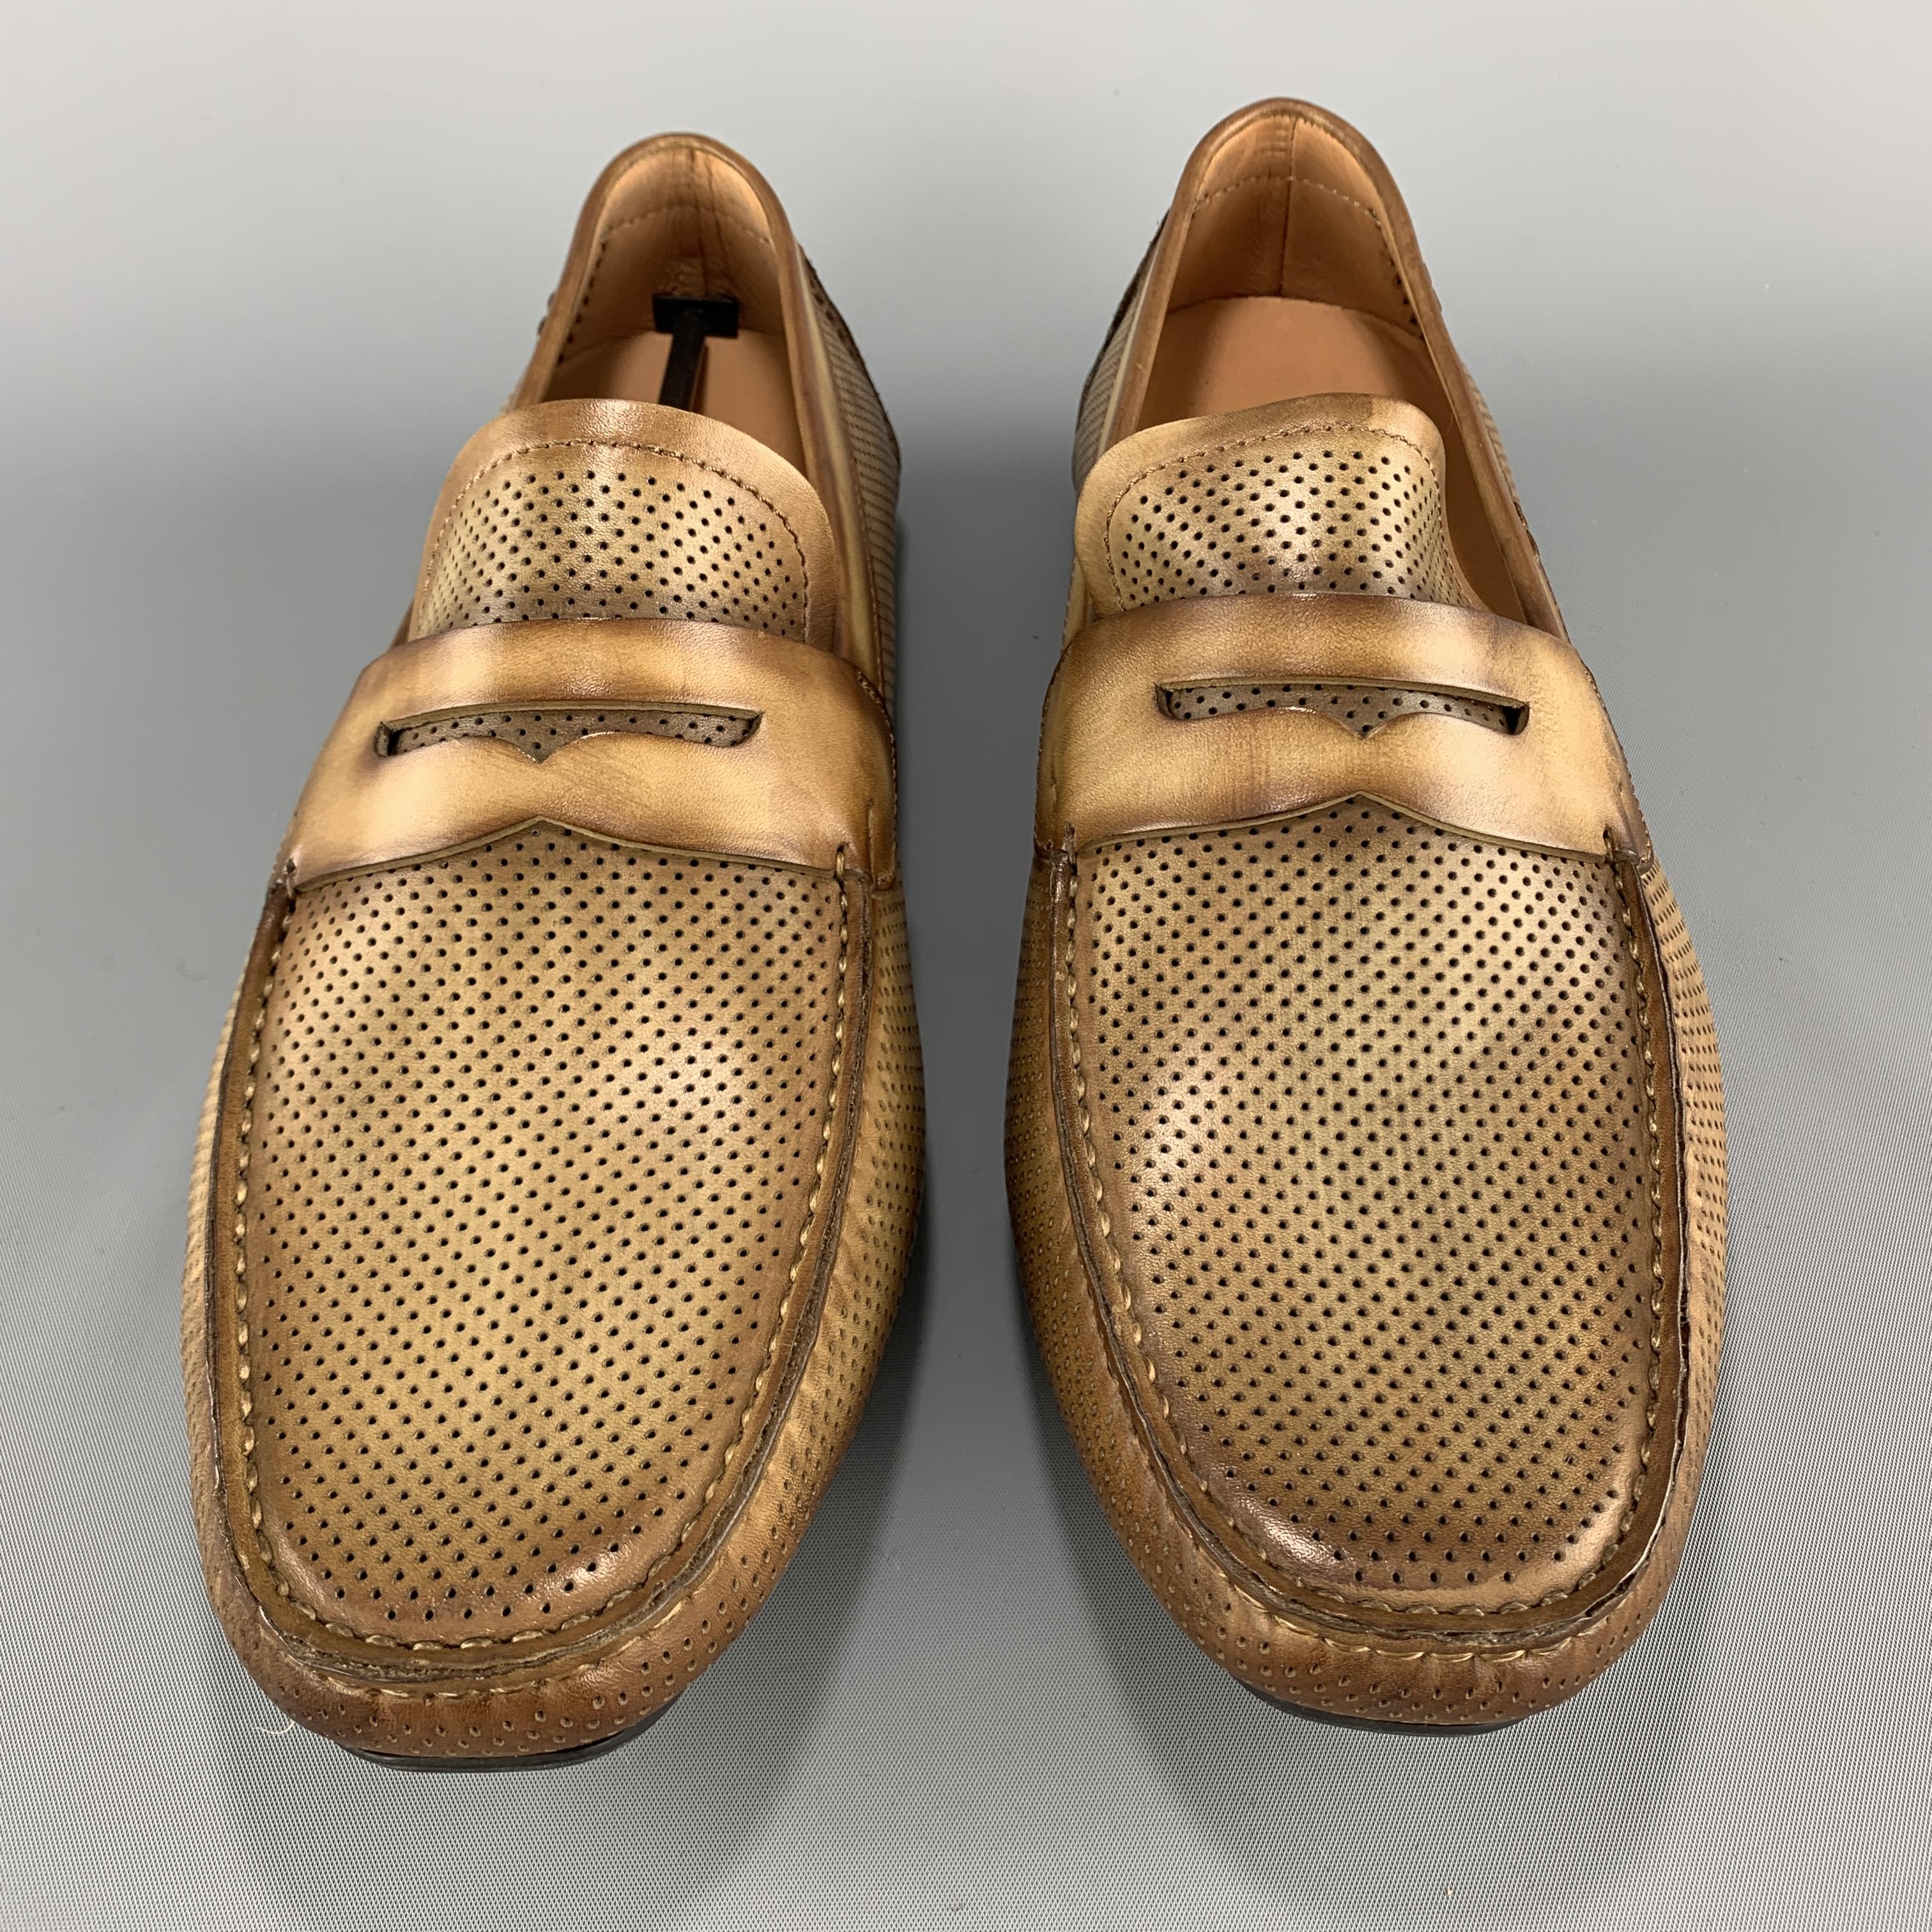 MAGNANNI loafers come in antique effect beige perforated leather with a driver sole. Made in Spain.

New in Box.
Marked: 10.5

Outsole: 12.25 x 4.25 in.